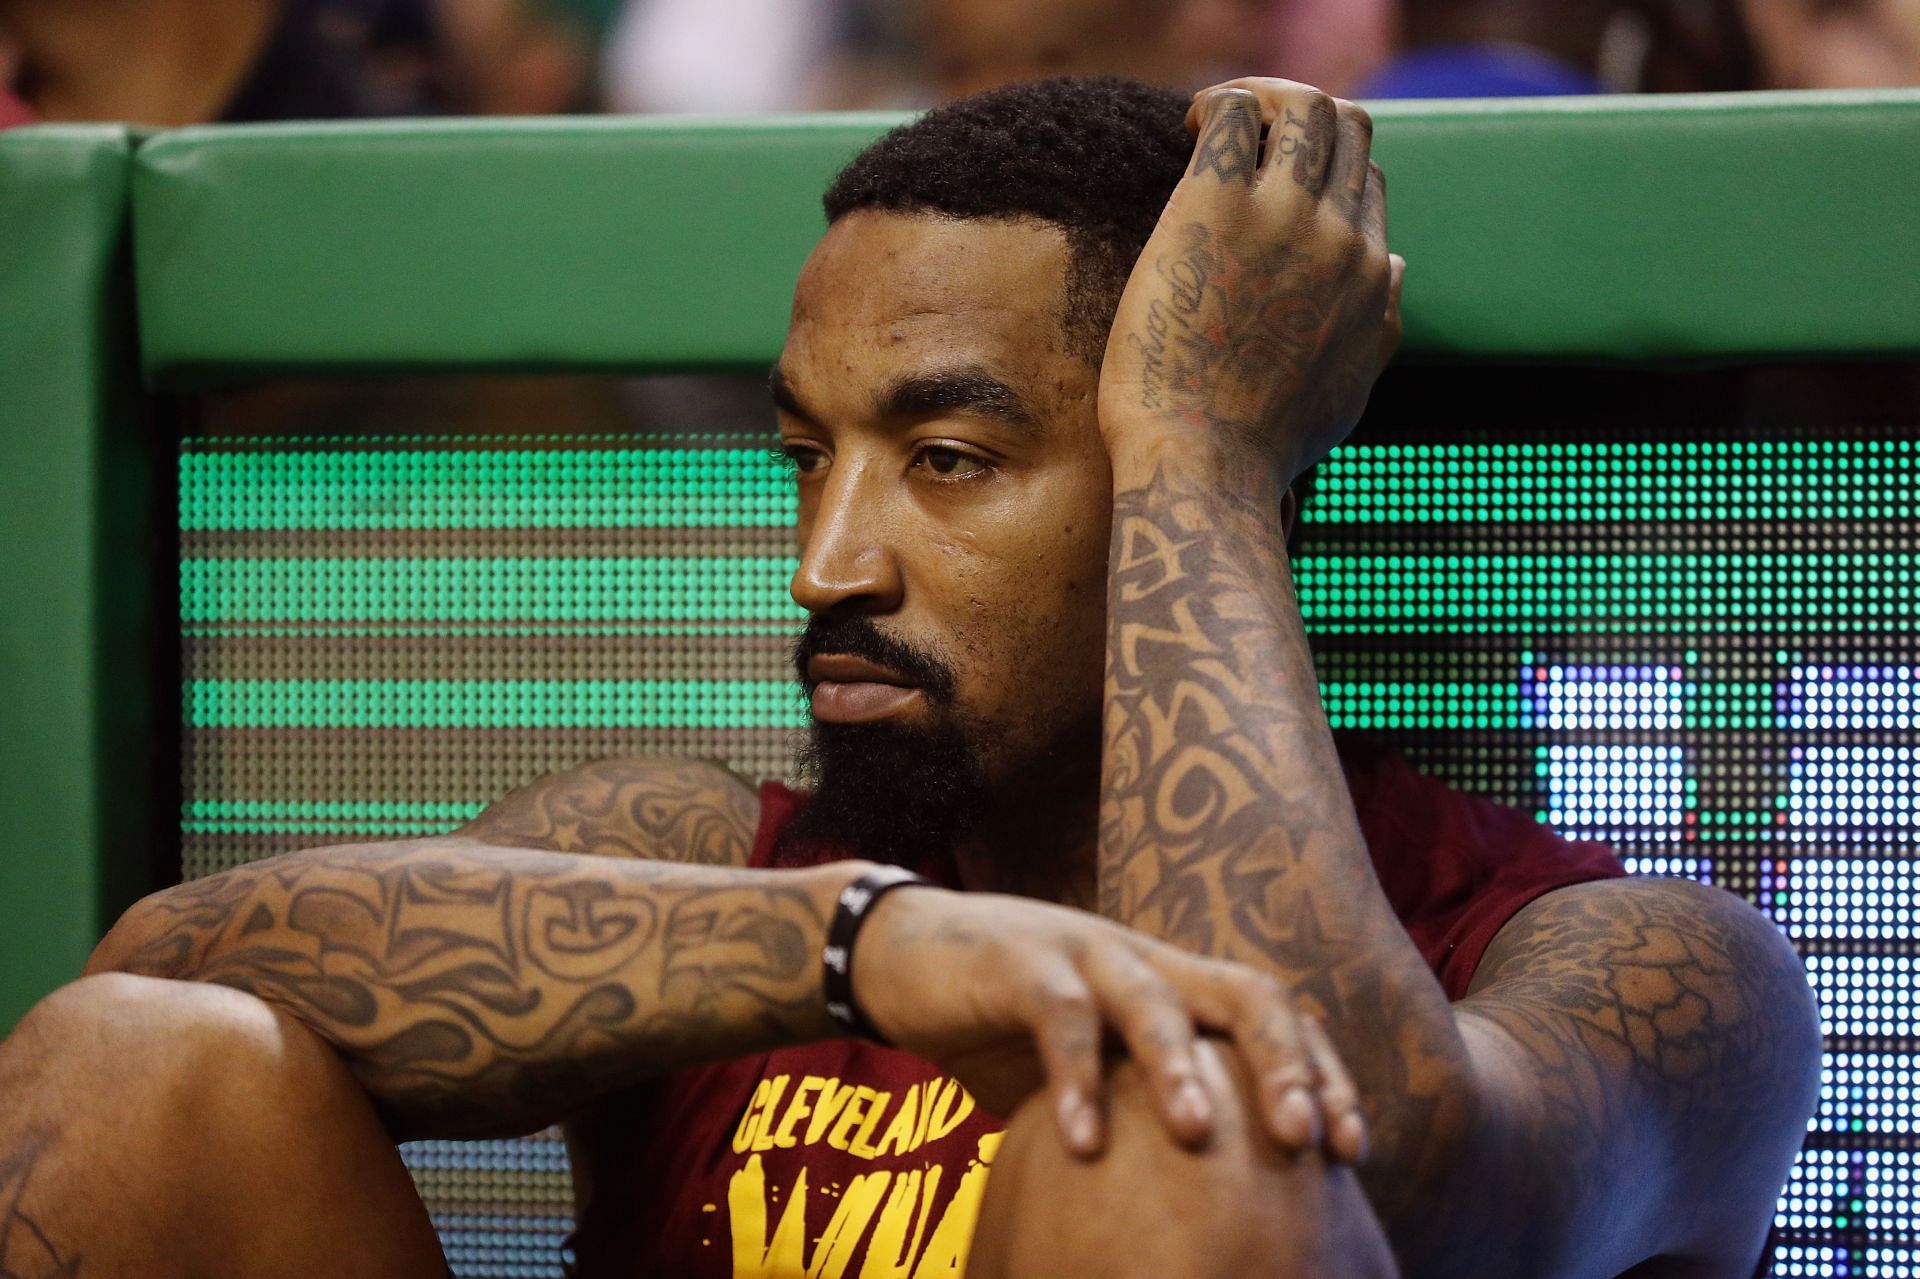 J.R. Smith last played in the NBA in 2020.